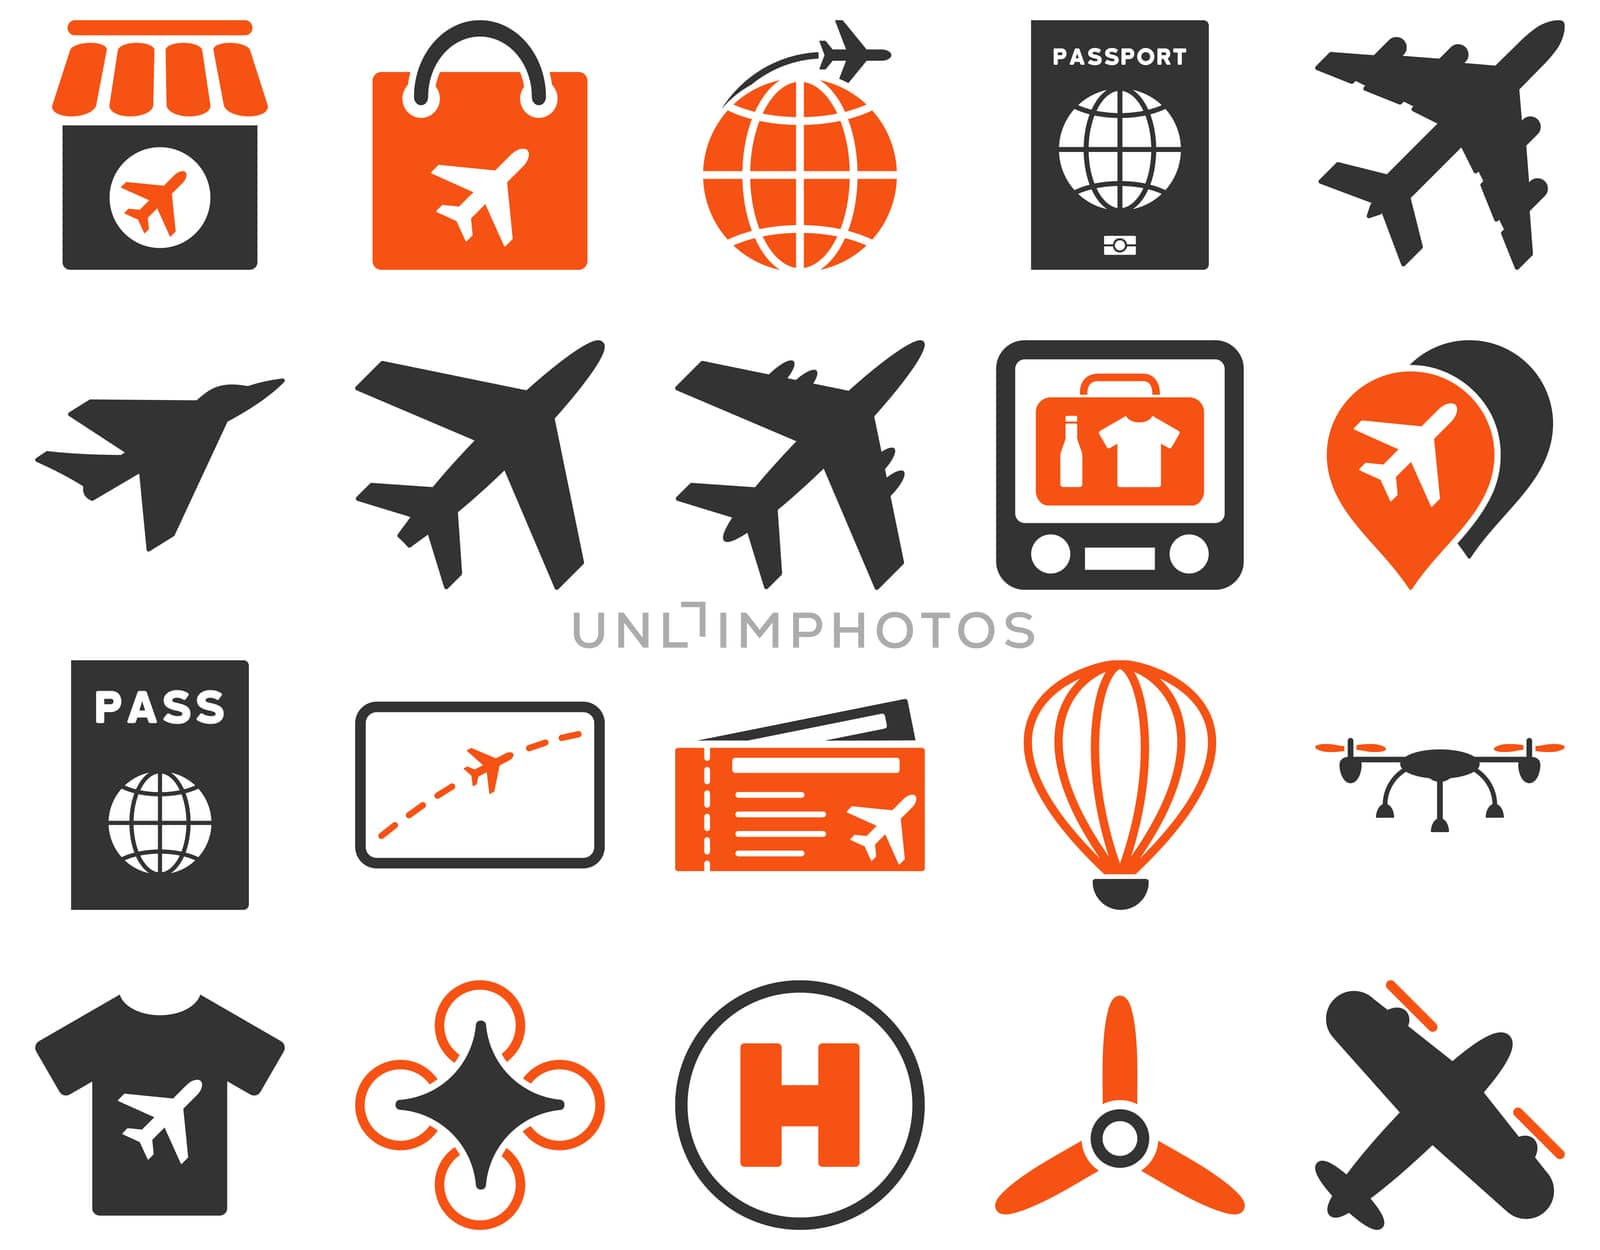 Airport Icon Set. These flat bicolor icons use orange and gray colors. Raster images are isolated on a white background.